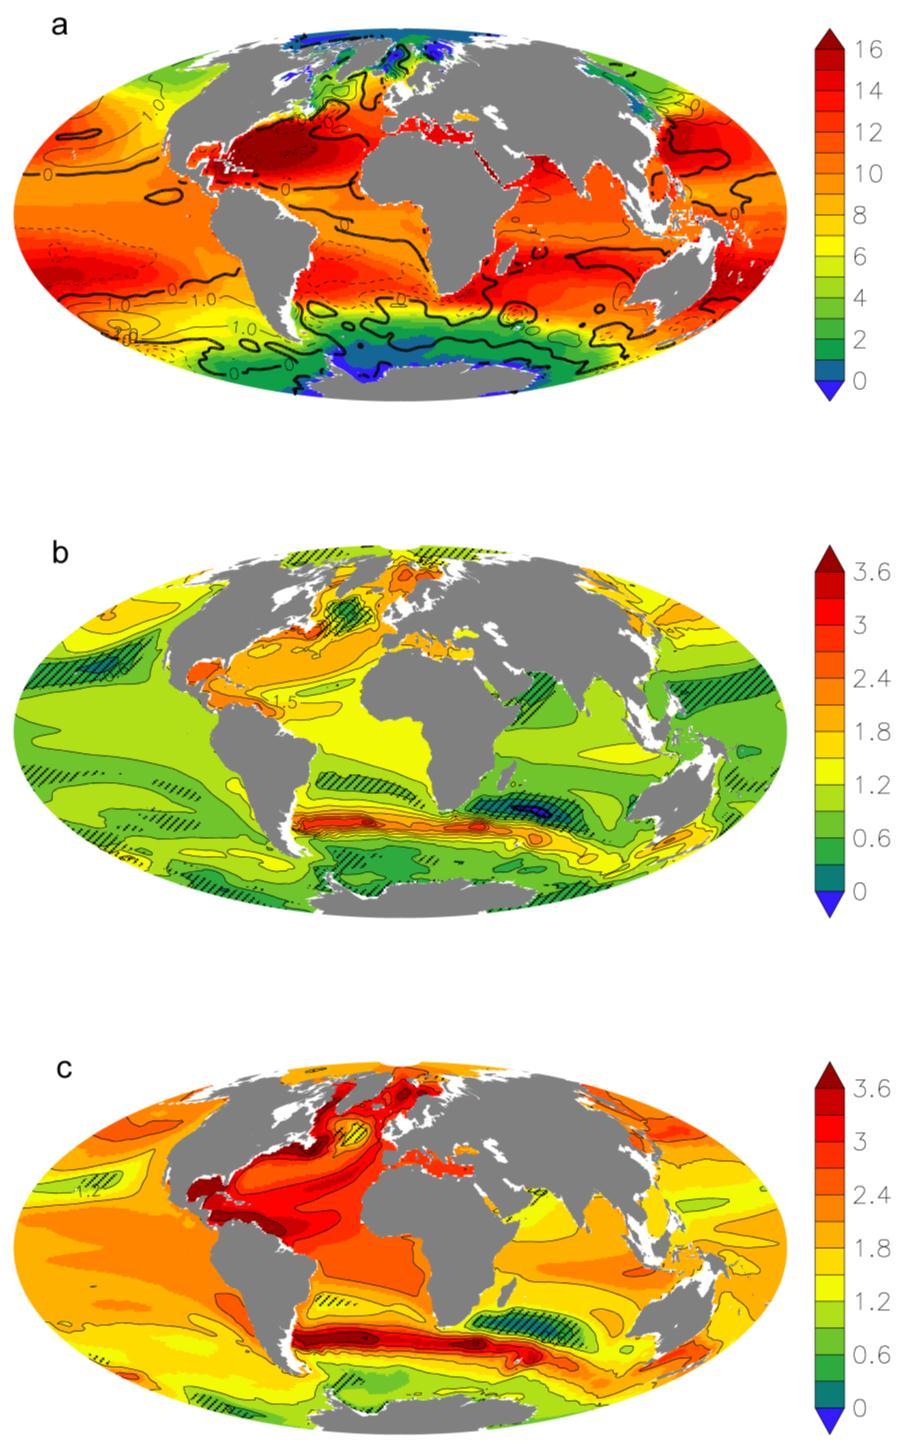 Figure S1. Global map of recent observed and ensemble mean projections of subsurface (200-500 m) ocean warming ( o C) for the 21st and 22nd century under the A1B scenario.